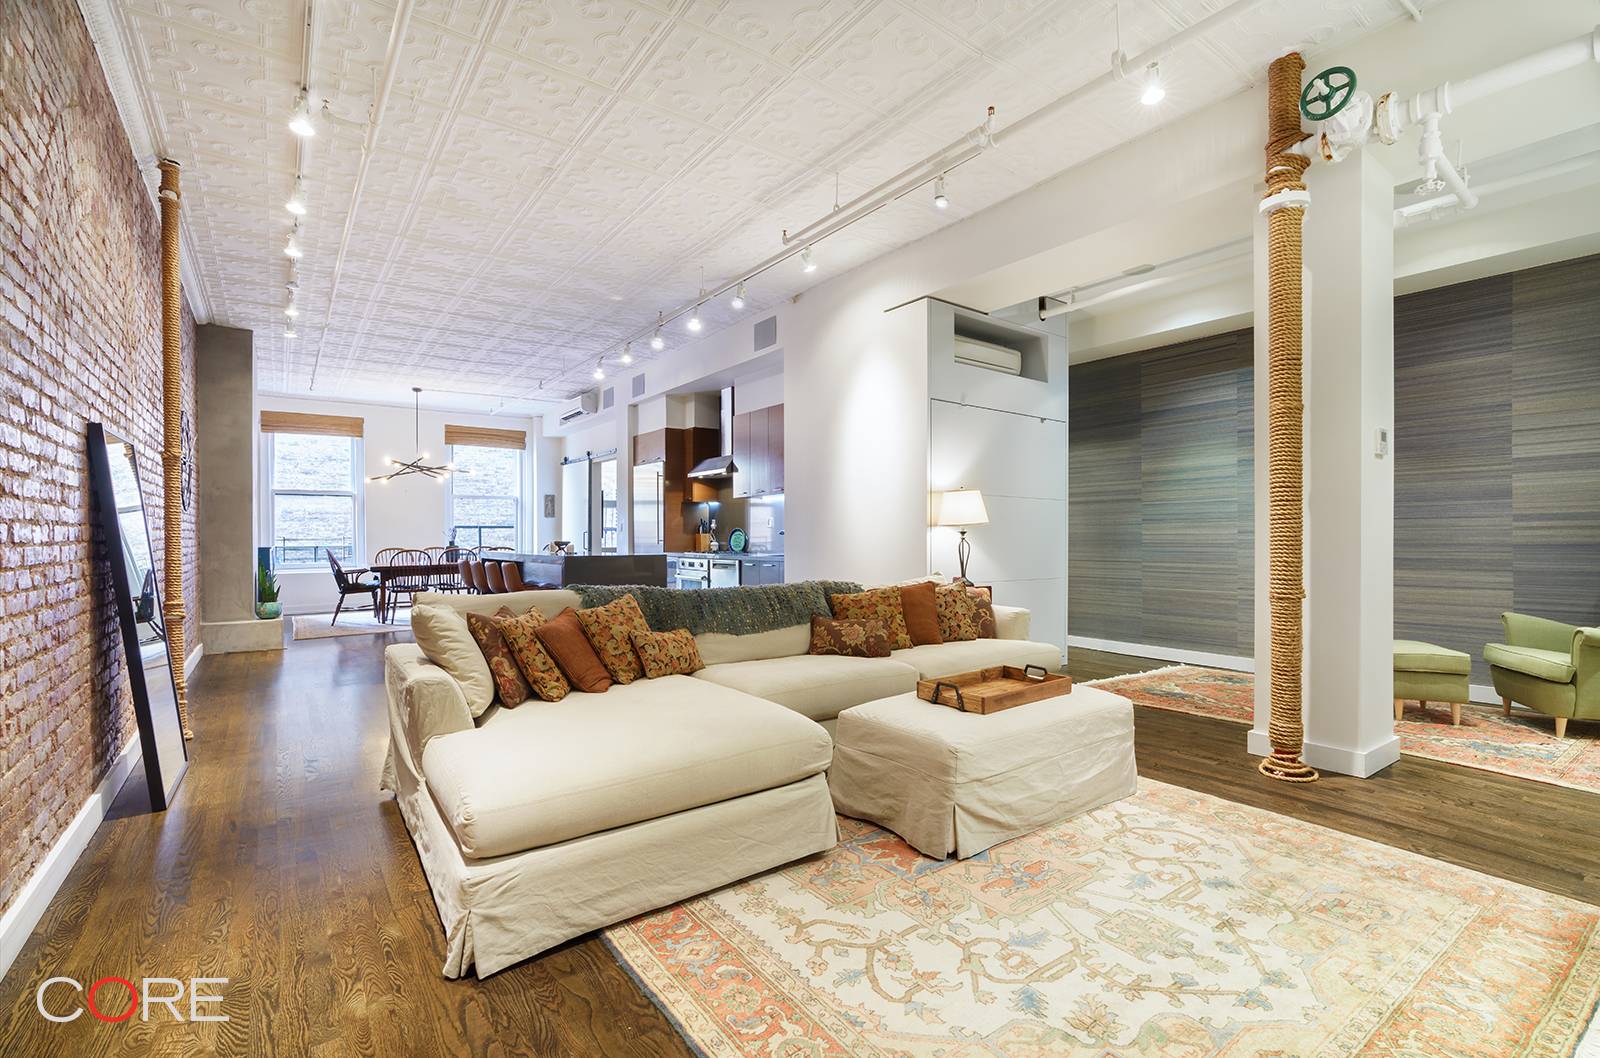 Bask in this quintessential, sprawling SoHo loft in the heart of the Cast Iron District.